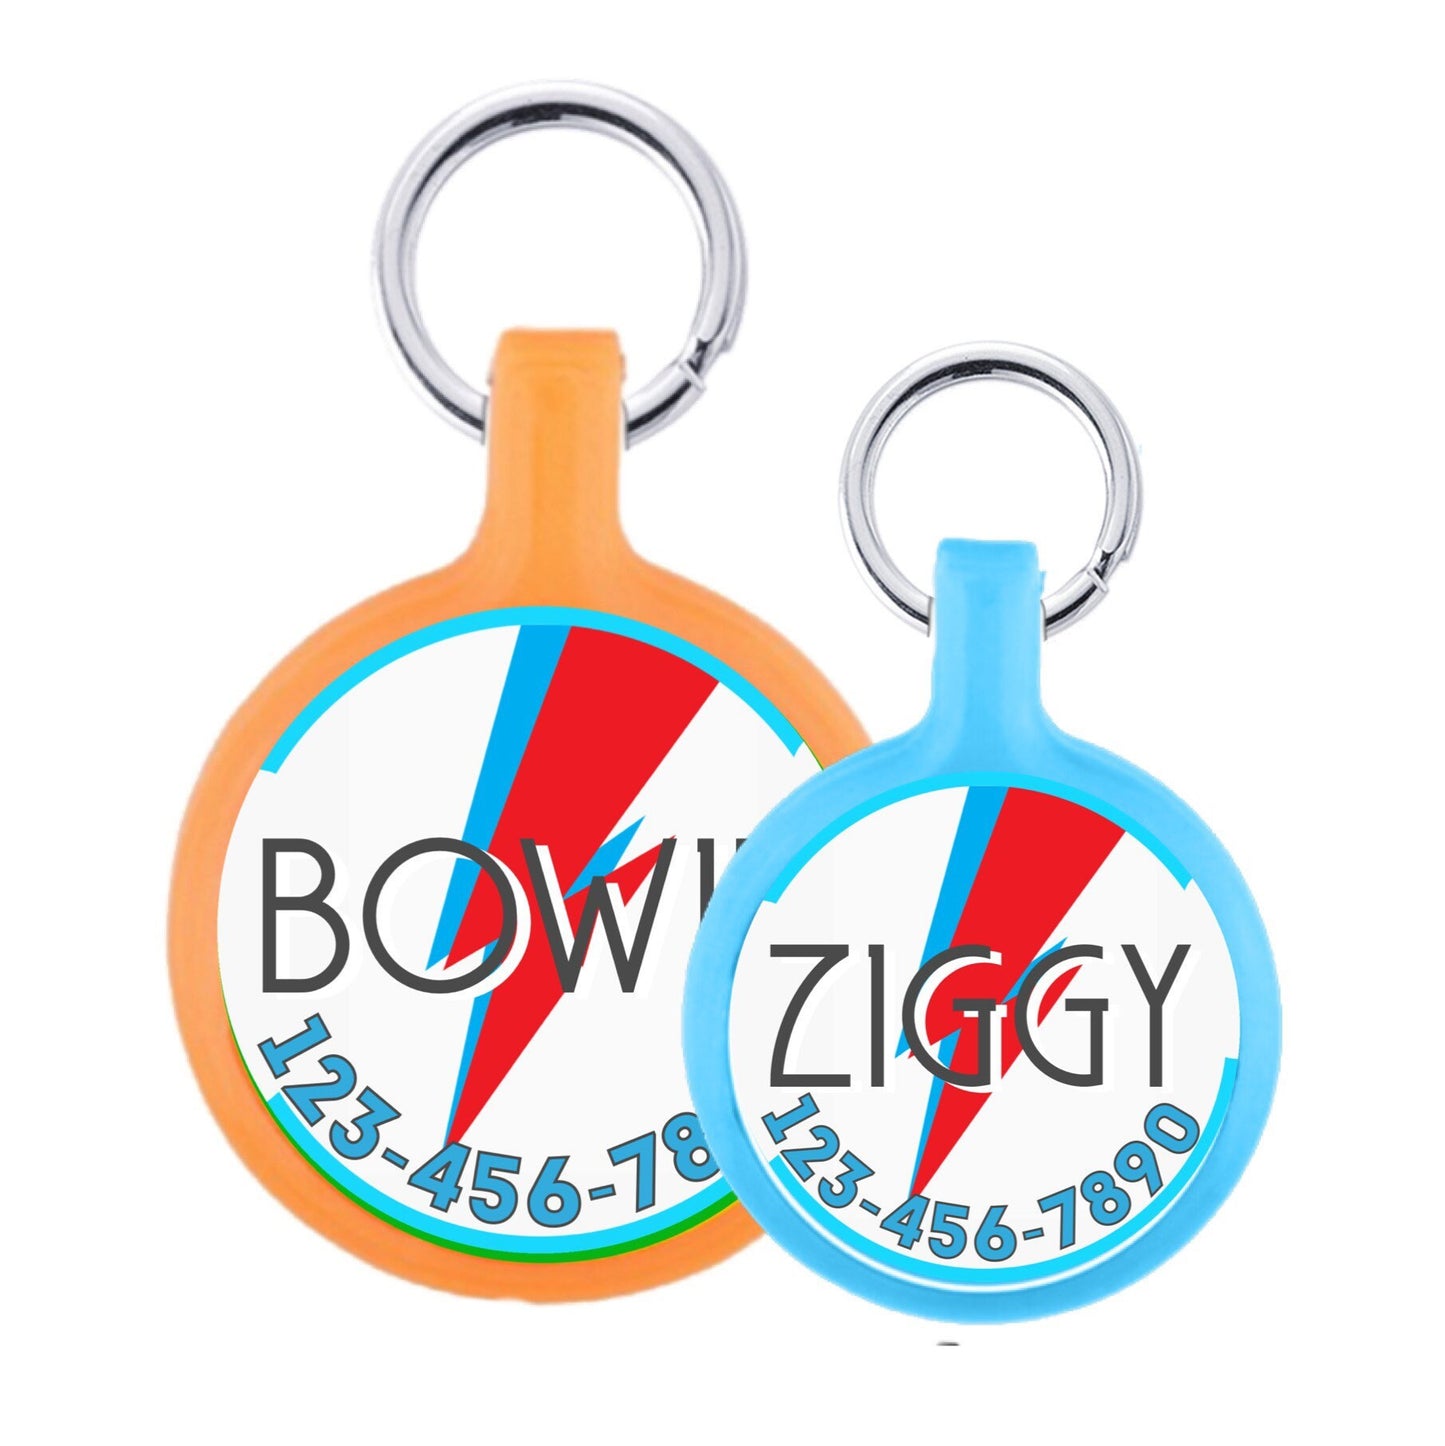 Cute Lightning Bolt Bowie Ziggy Stardust-inspired Design Personalized Dog ID Pet Tag Custom Pet Tag You Choose Tag Size & Colors